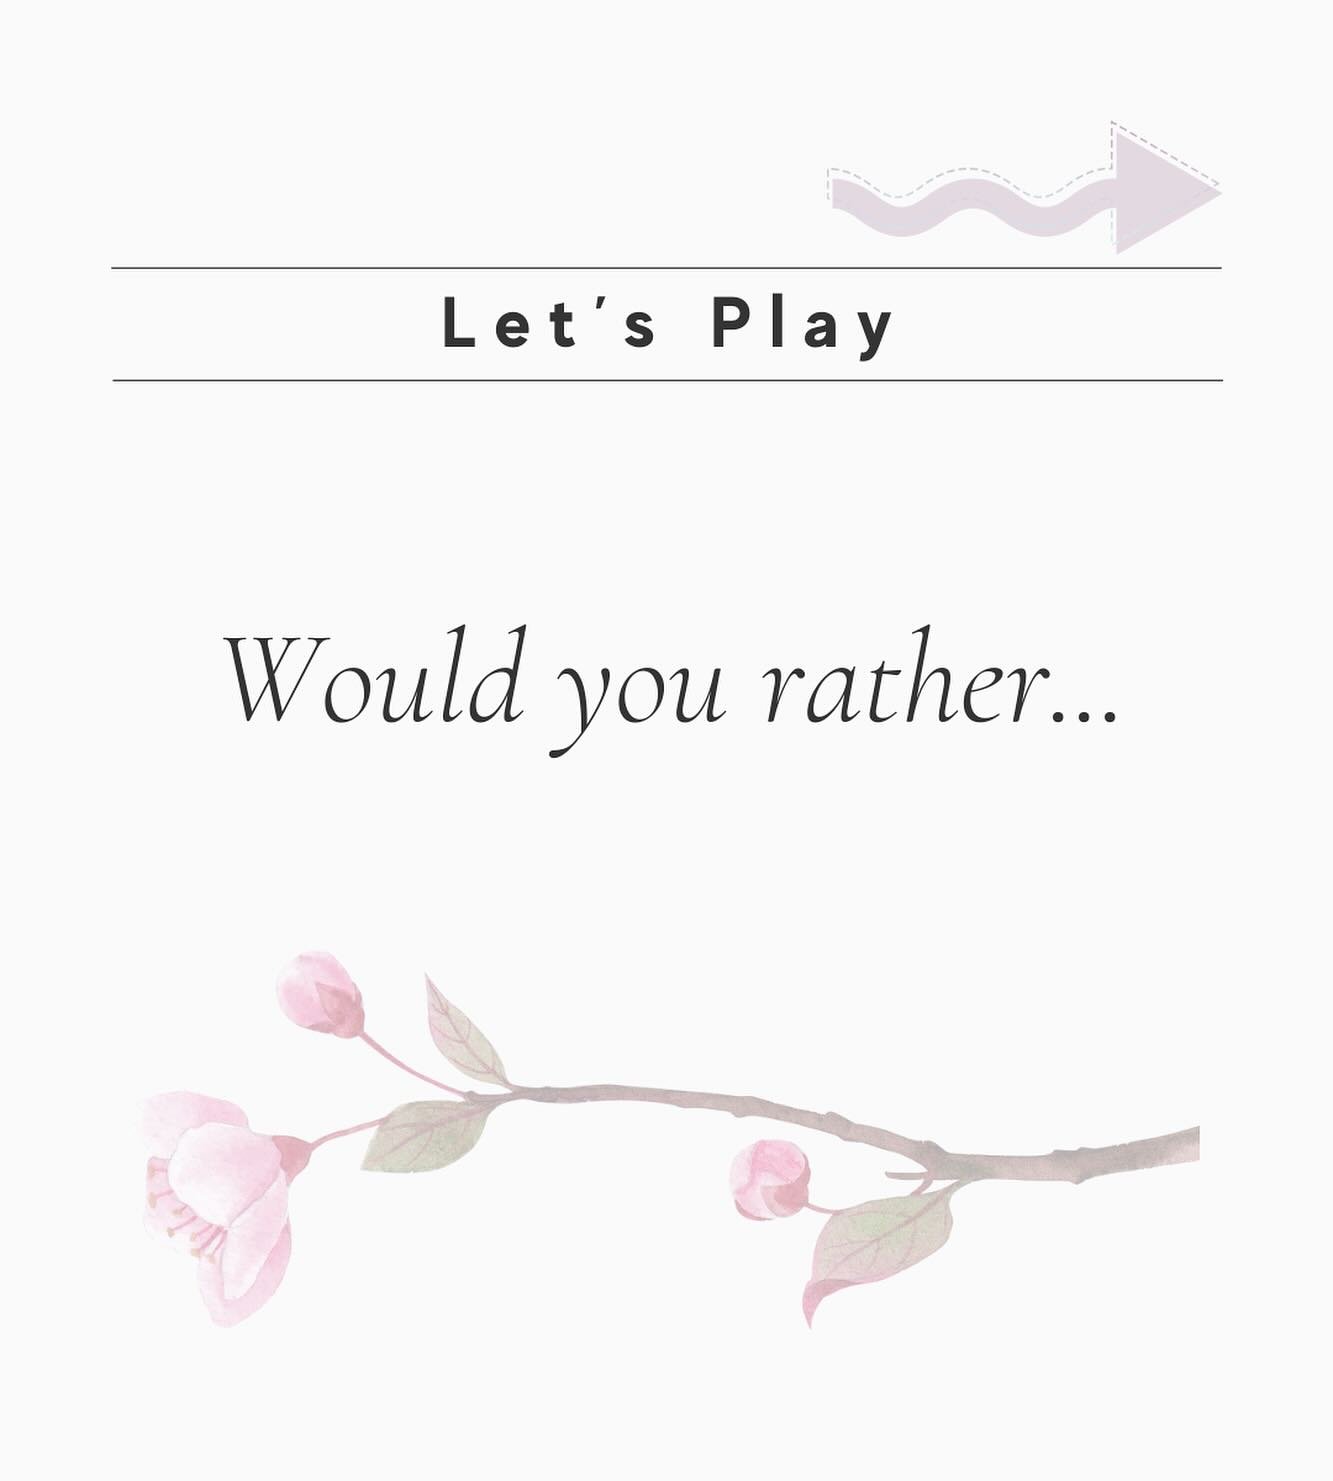 Just for fun, let&rsquo;s play &ldquo;Would you rather&hellip;&rdquo;

Tell me your answers in the comments. 
🌸🌸🌸

#authorslife #indieauthorsofig #romancereadersofbookstagram #wouldyourather